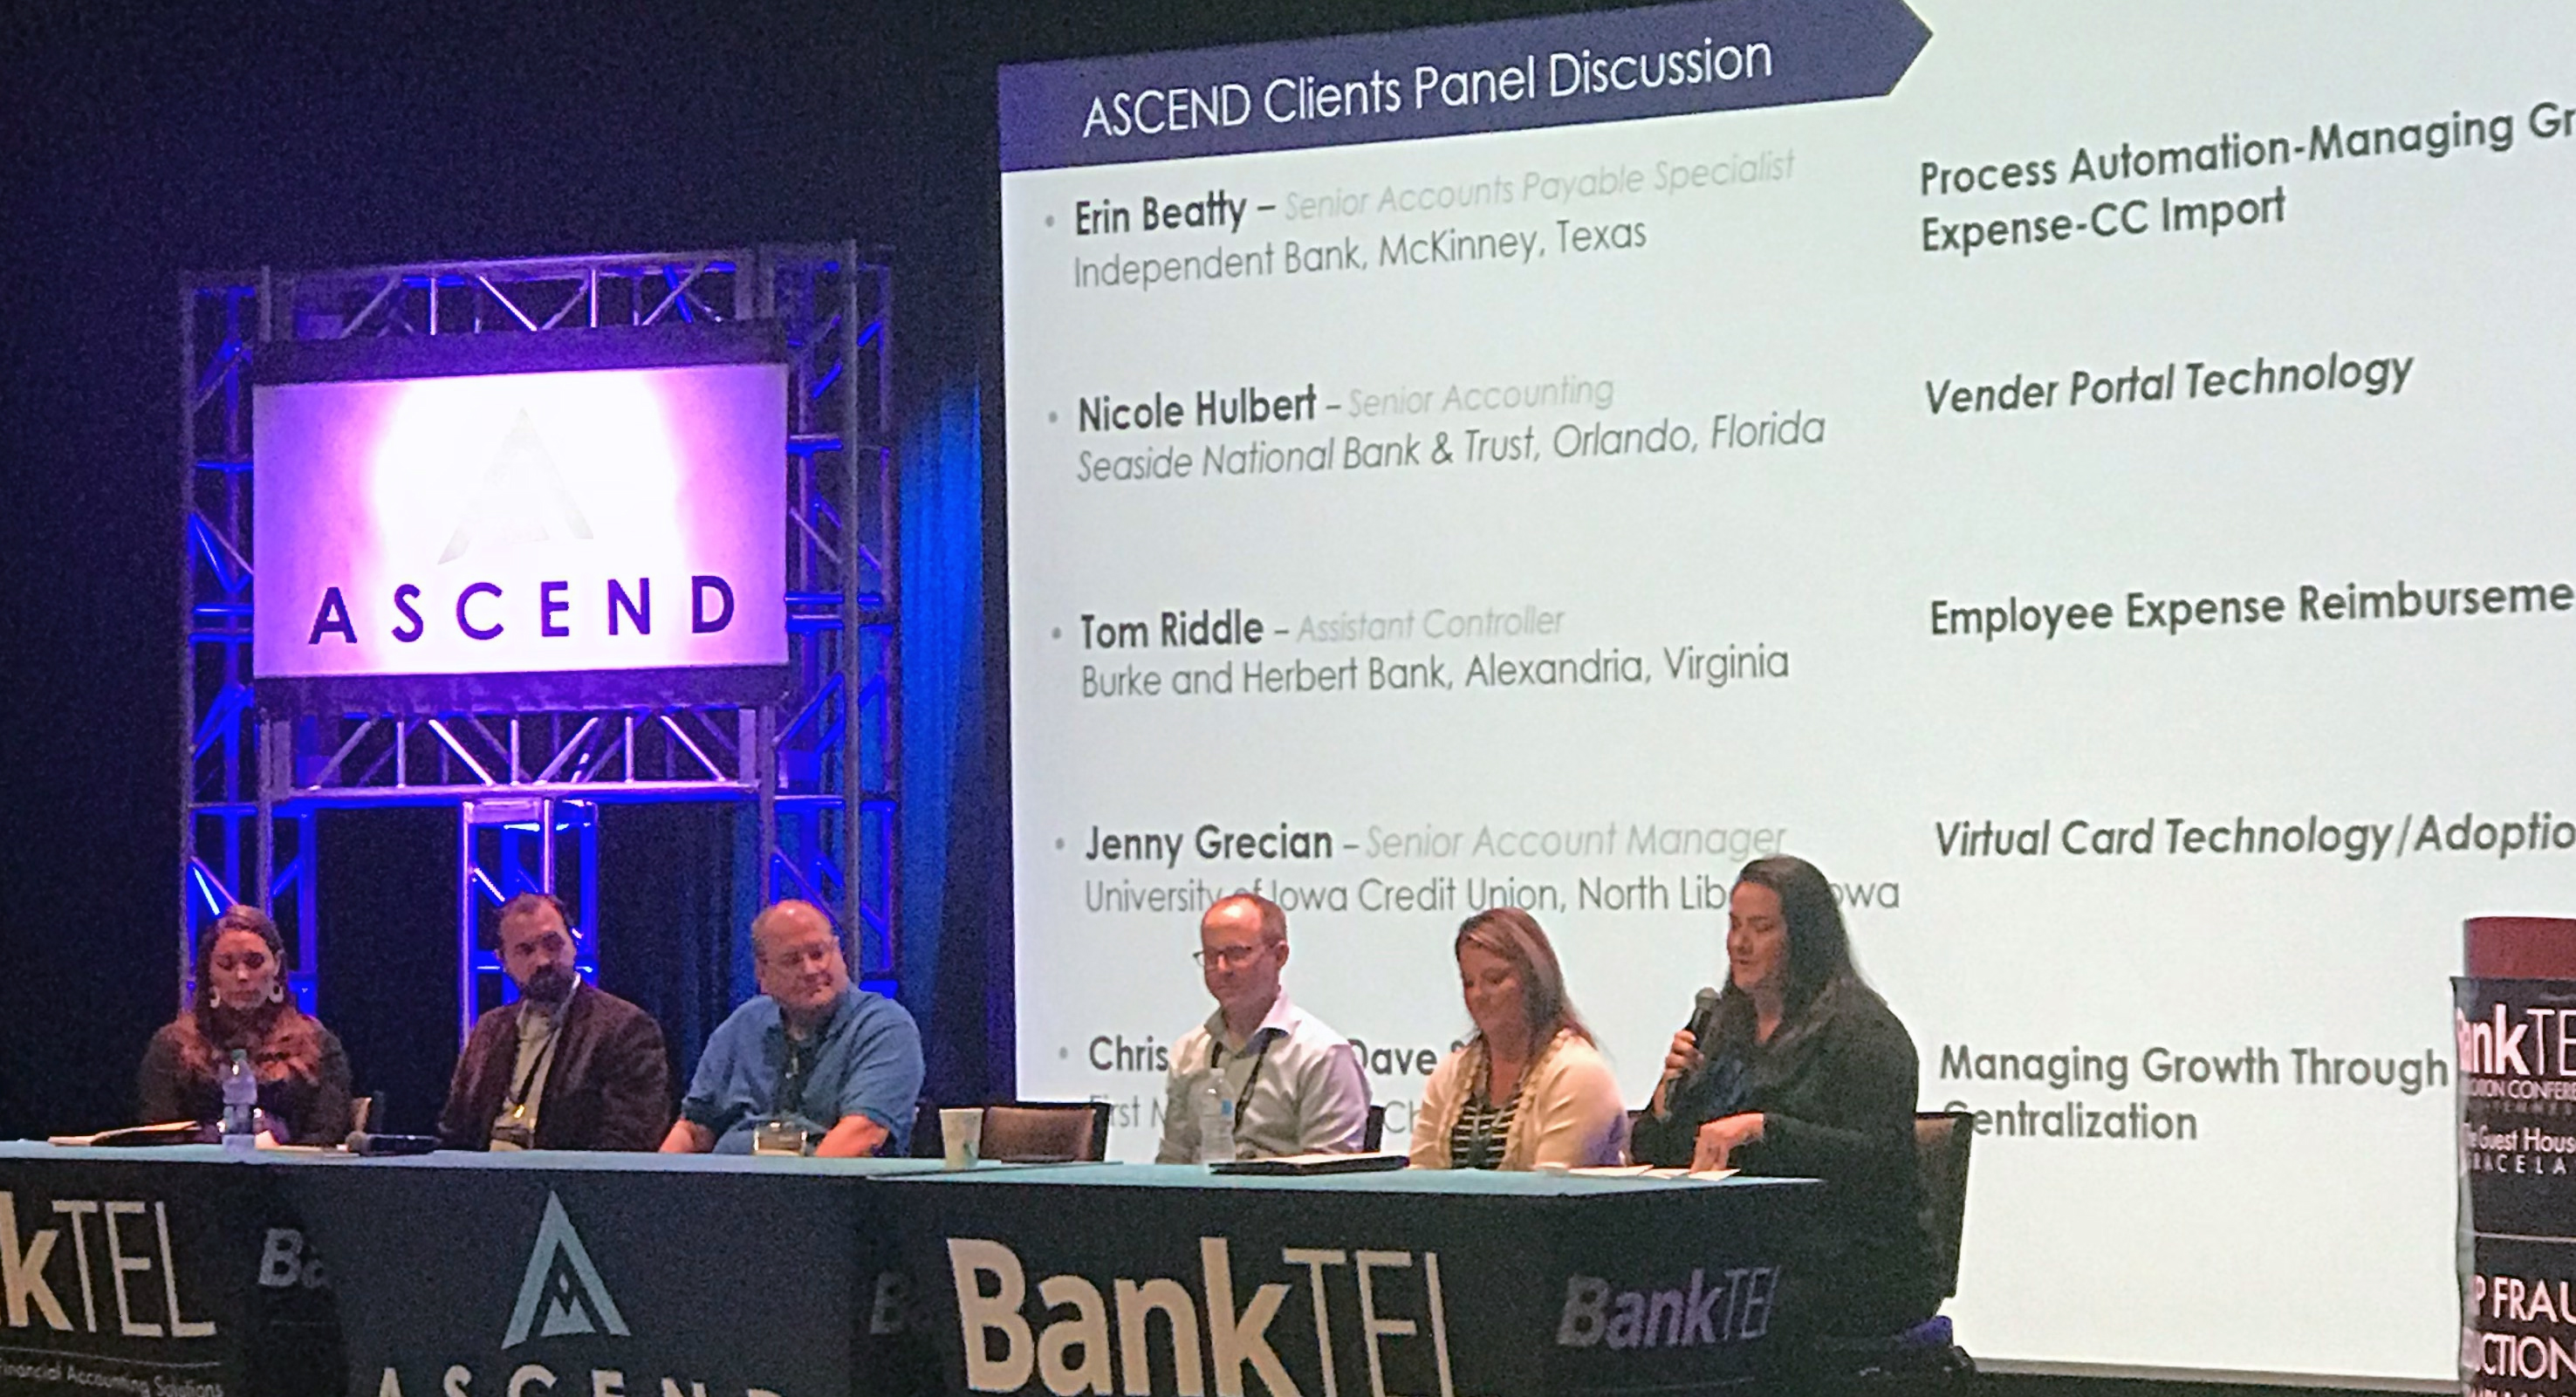 BankTEL User Panel Discusses Latest Trends in BankTEL Software